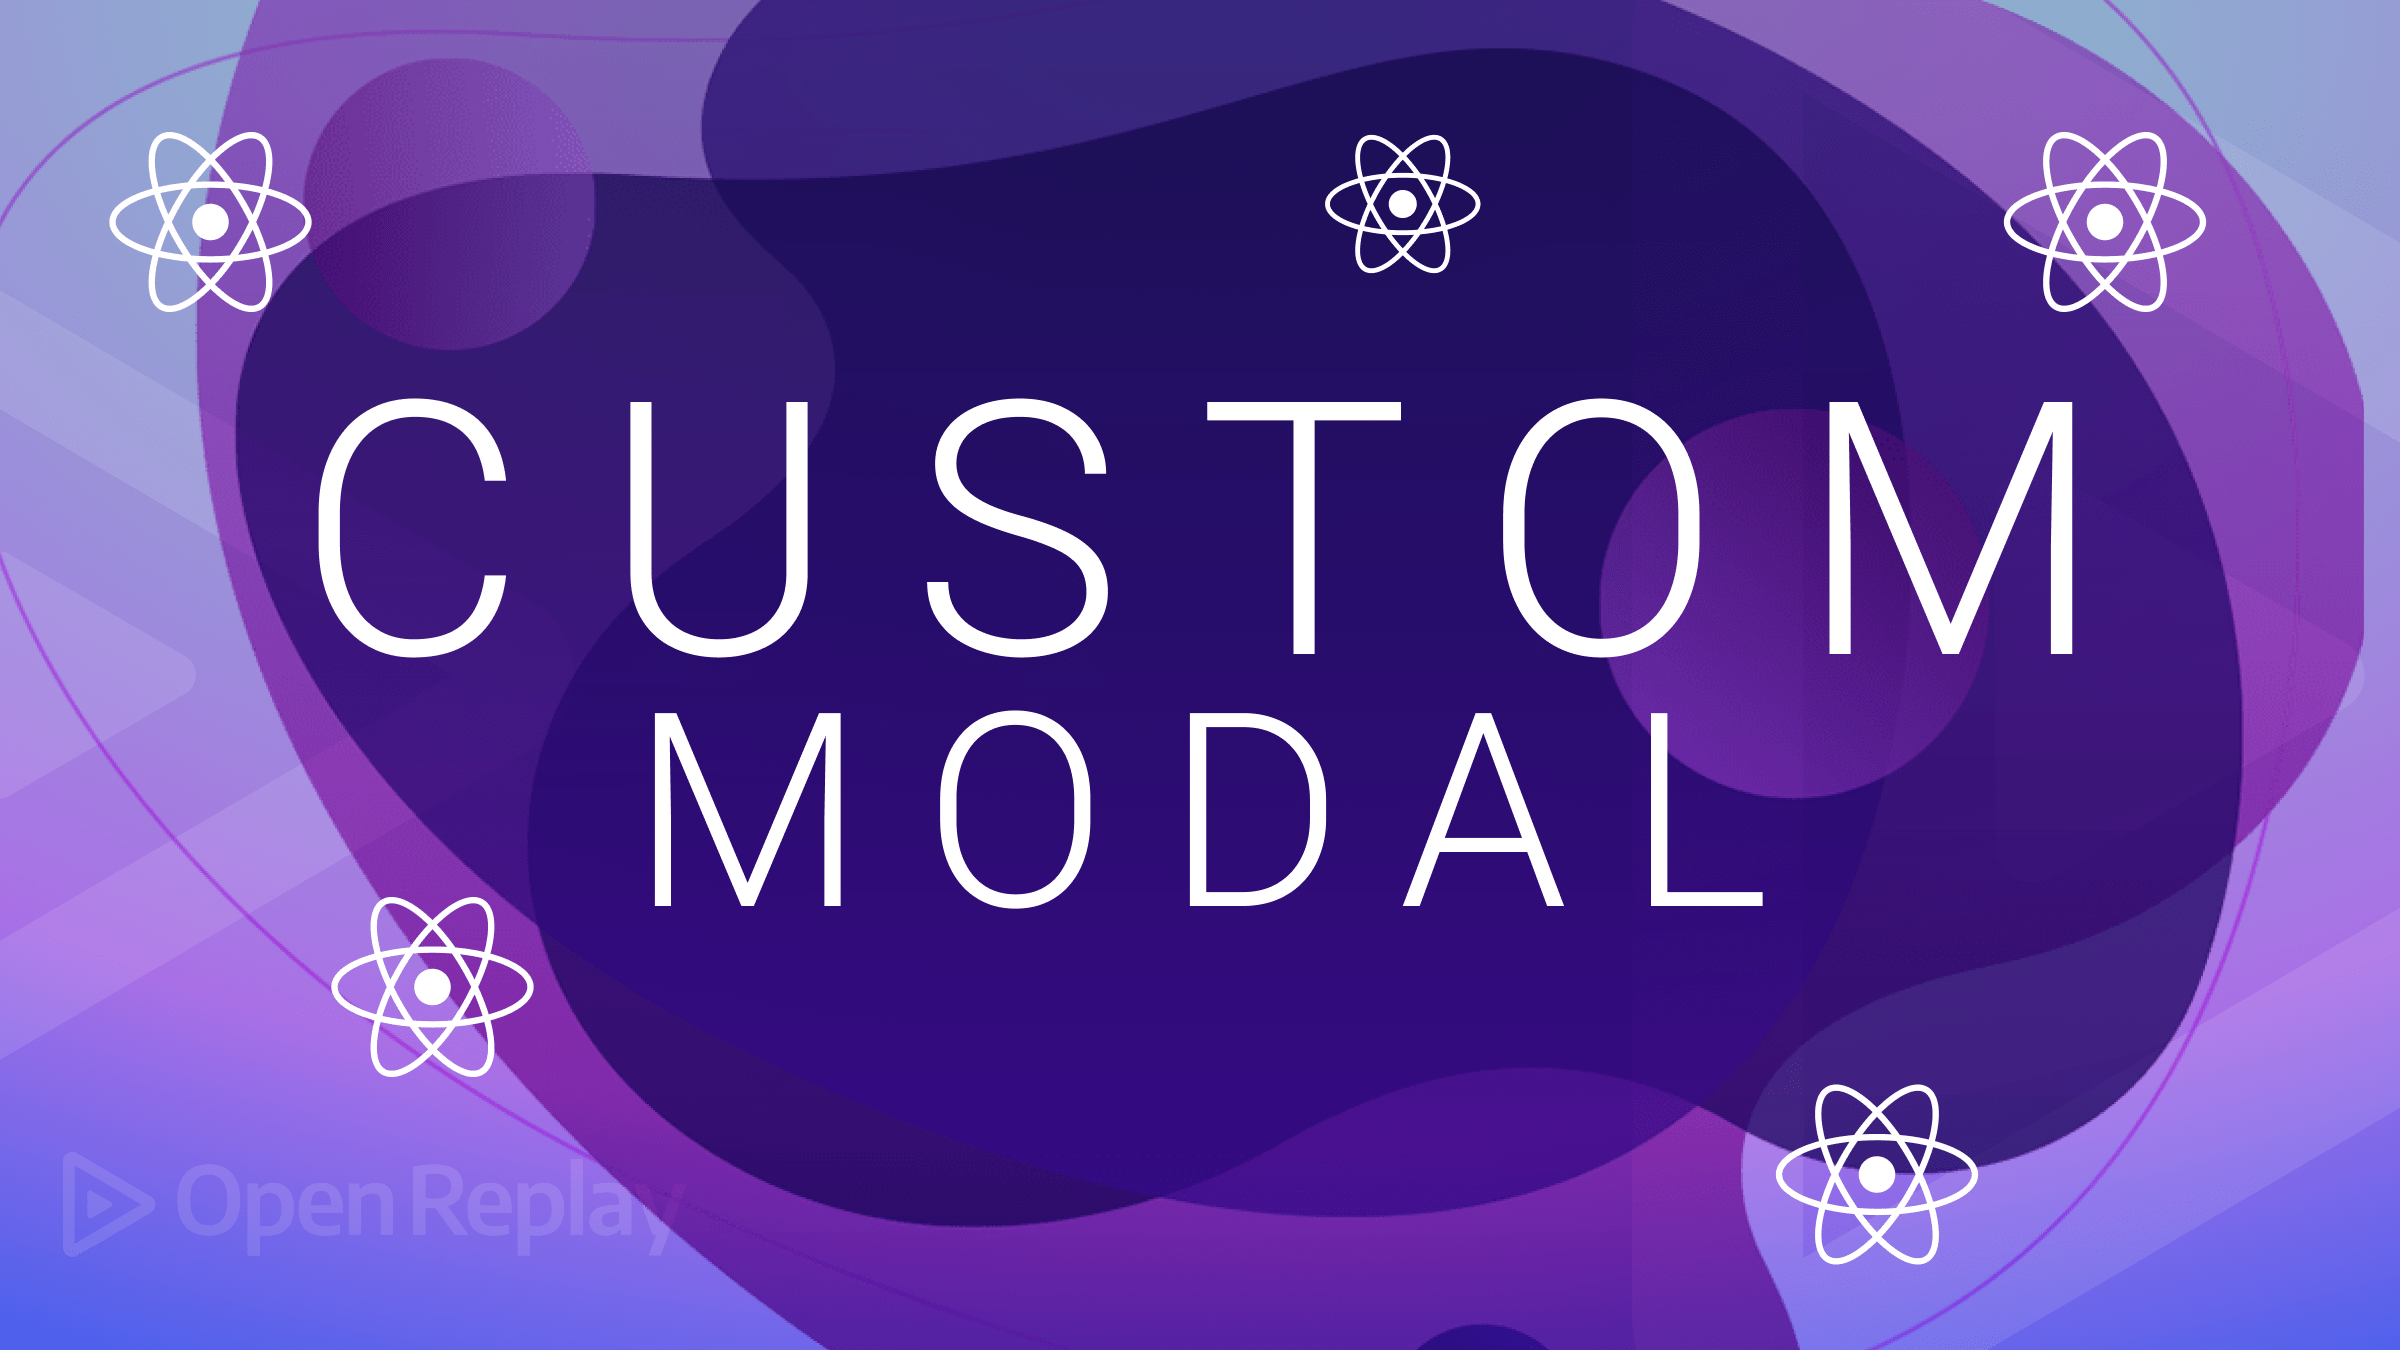 Creating easy custom modals with React